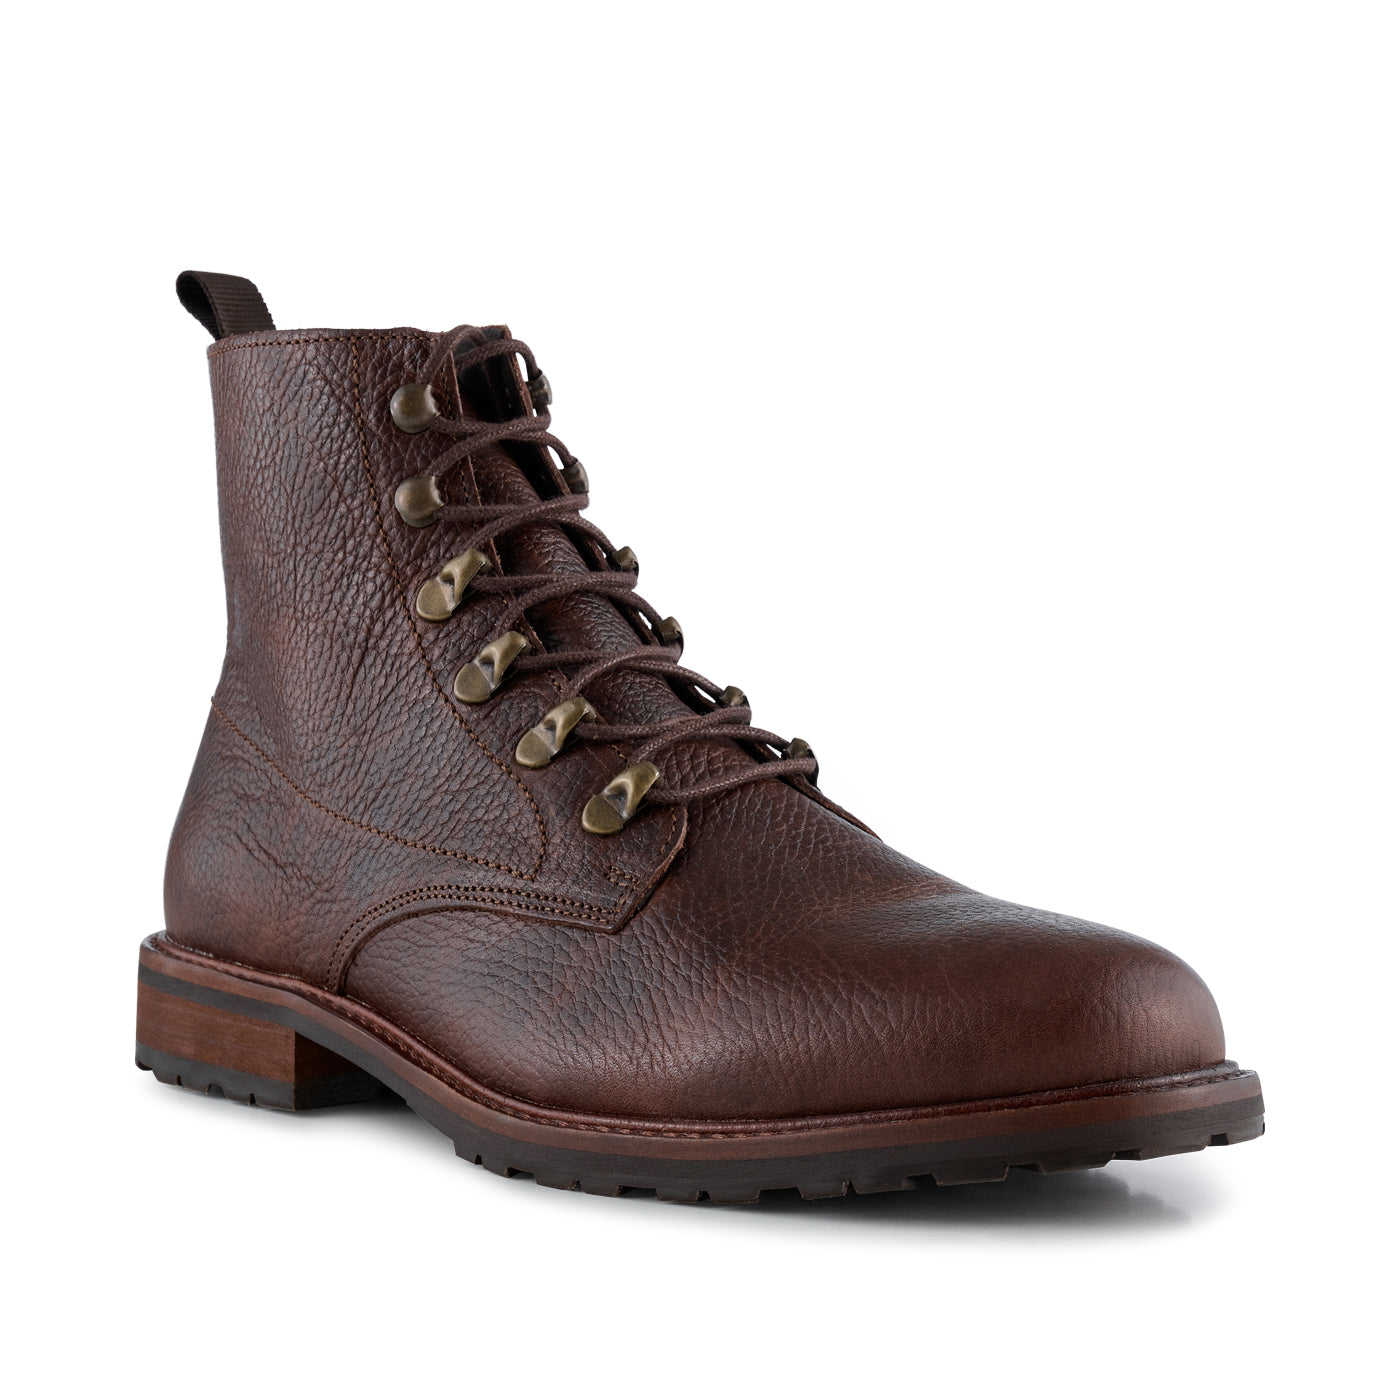 SHOE THE BEAR MENS Brigade Leather Boot Boots 130 BROWN